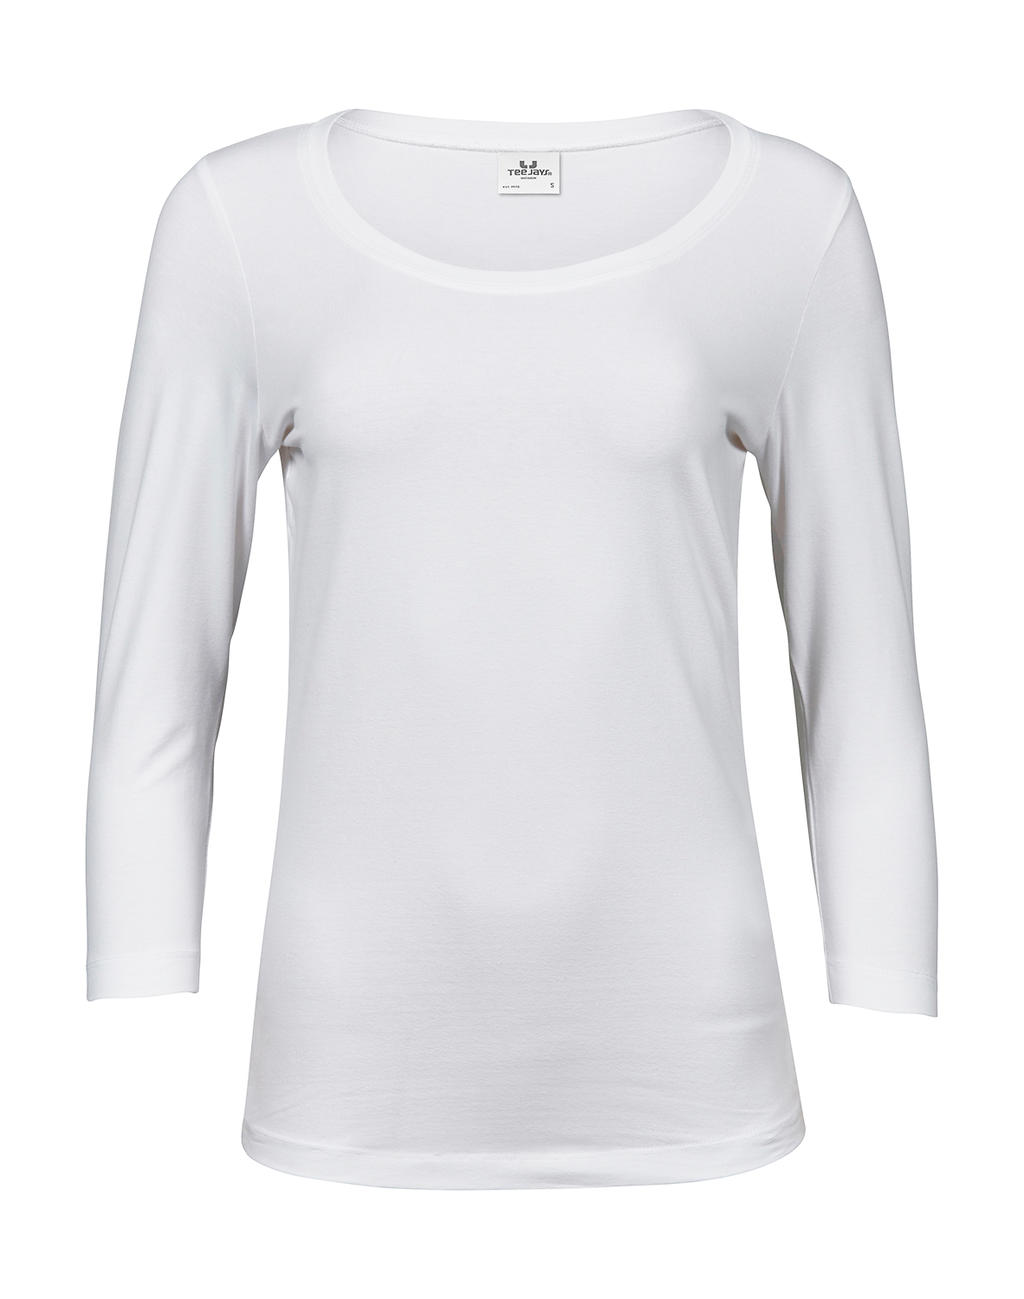  Ladies 3/4 Sleeve Stretch Tee in Farbe White